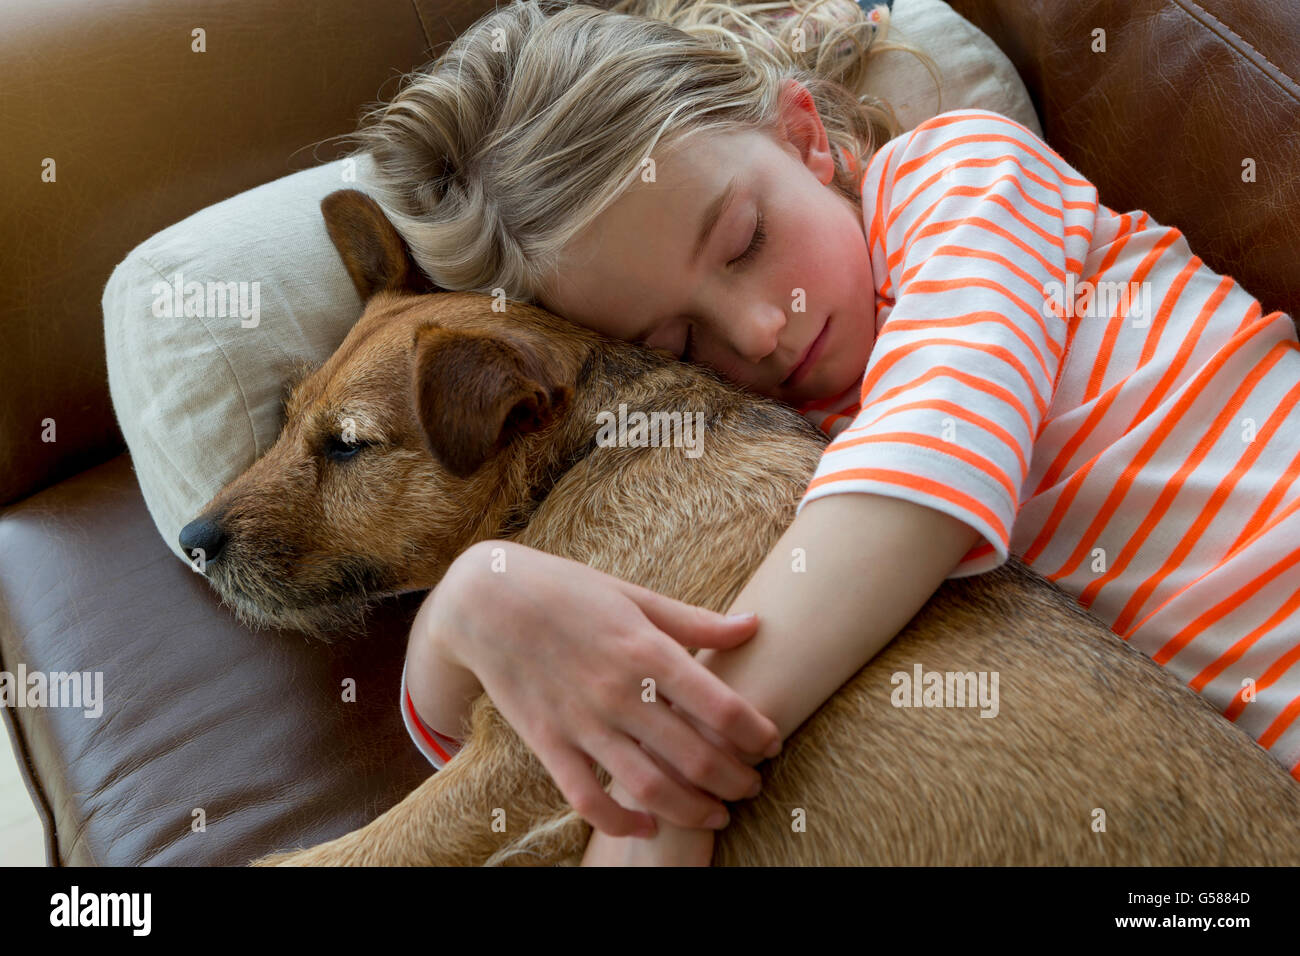 Young girl cuddling her pet dog on a sofa at home. Stock Photo